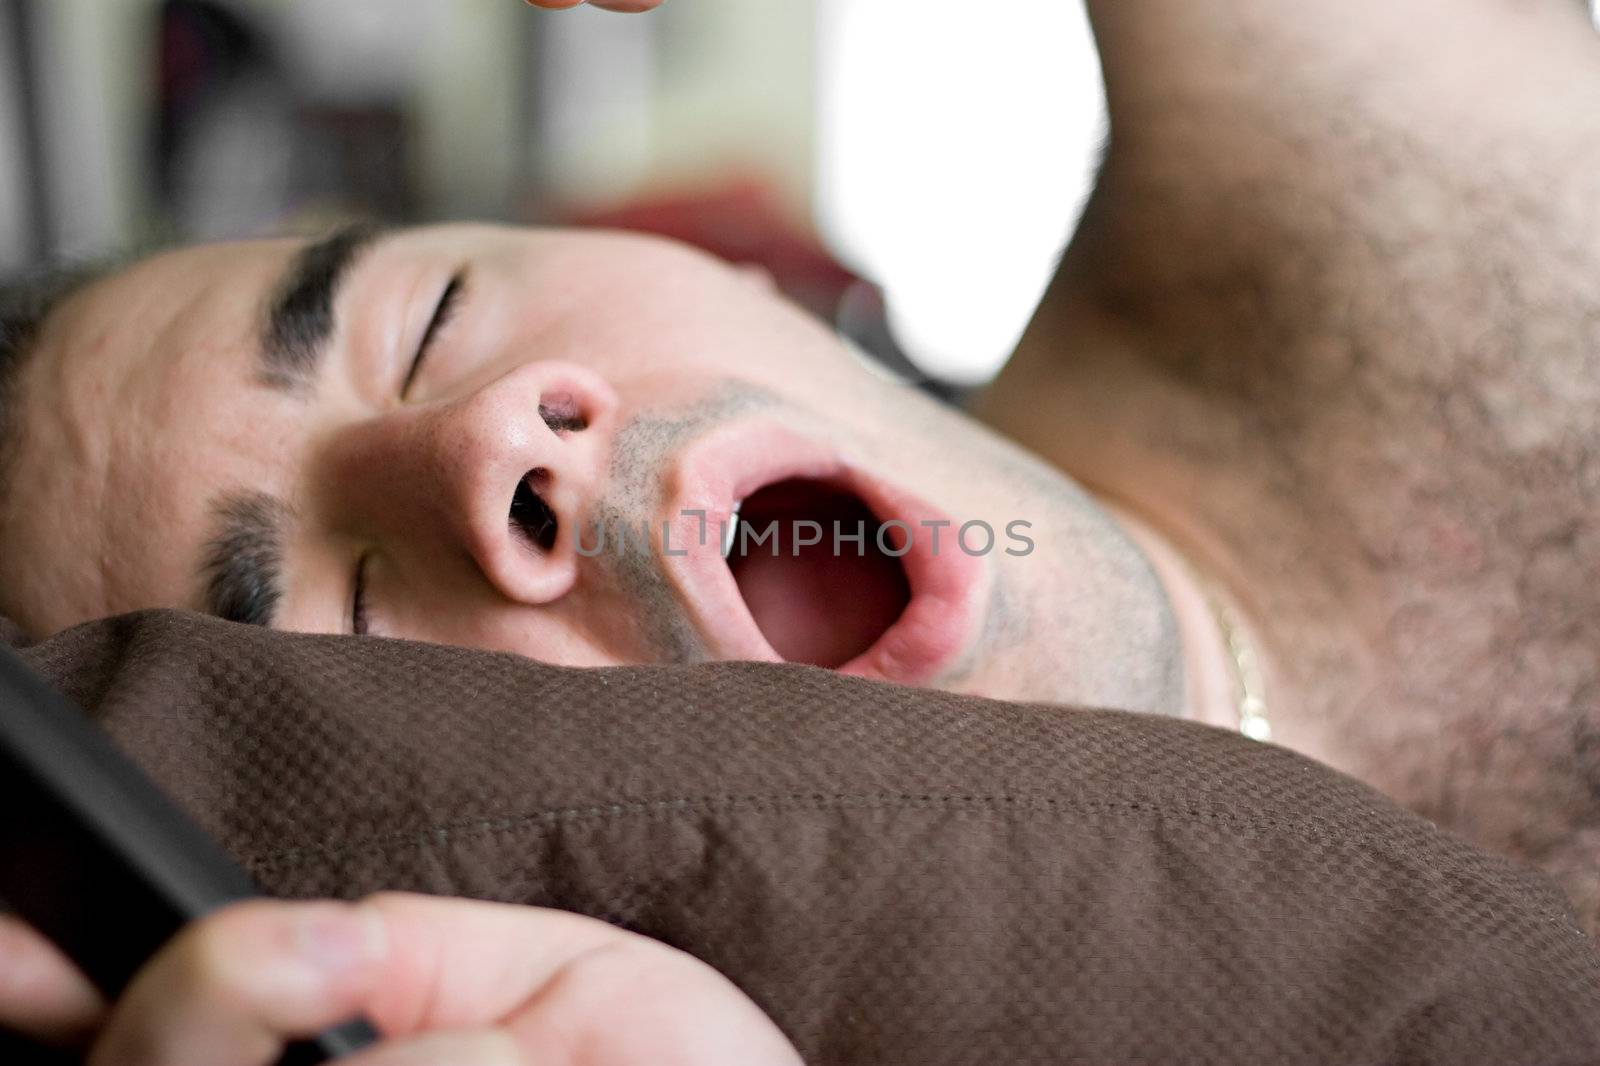 A young man is stretching and yawning in bed.